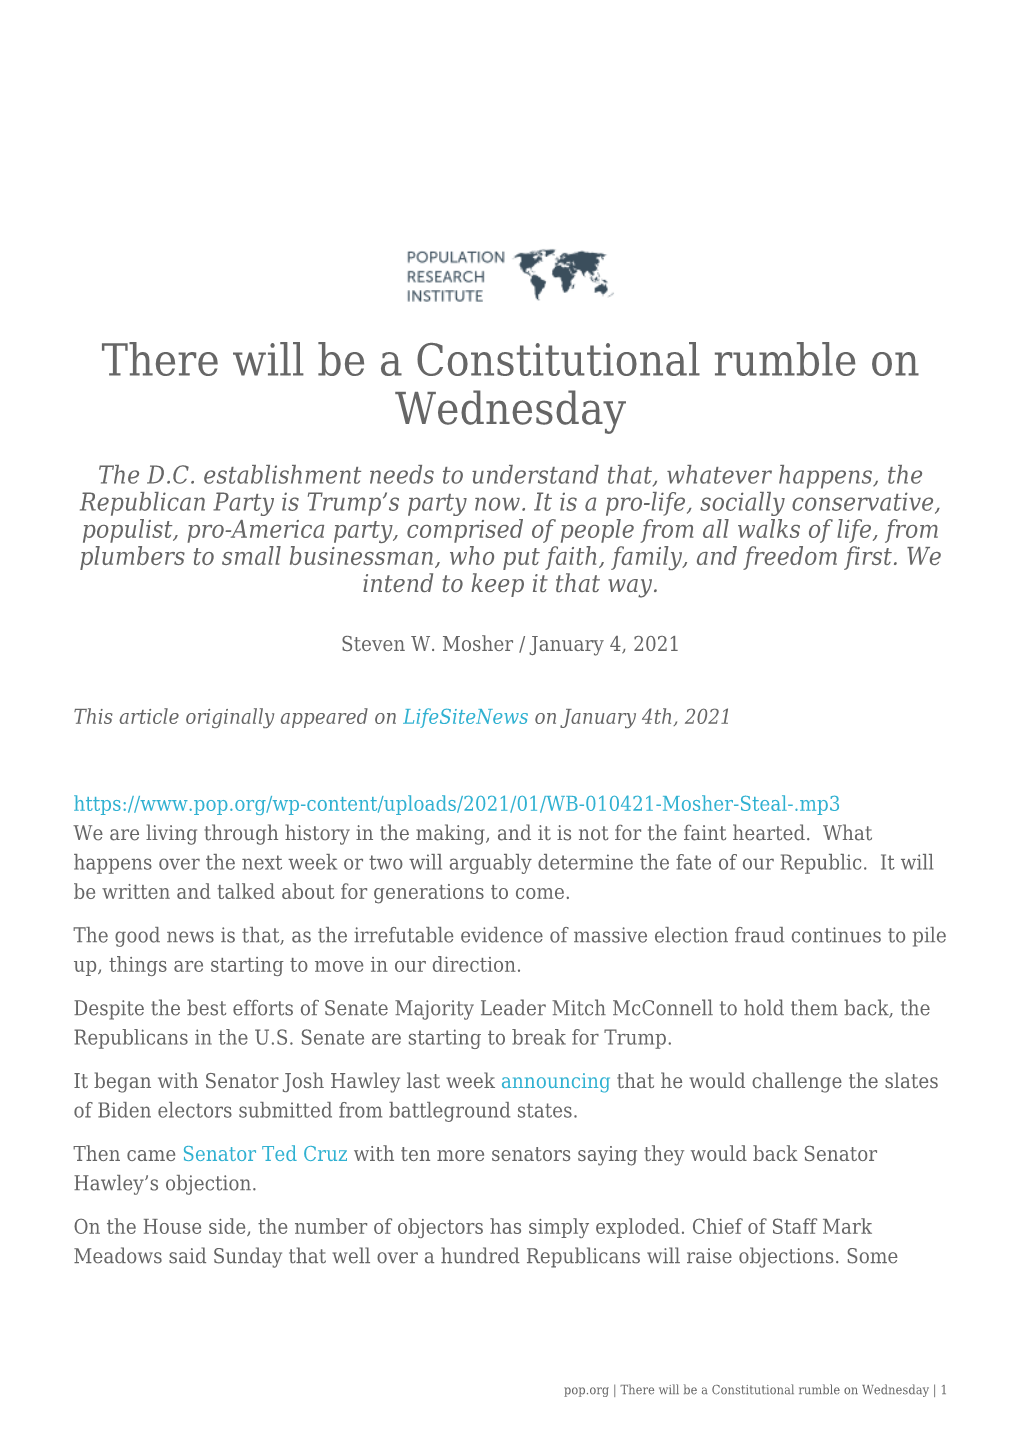 There Will Be a Constitutional Rumble on Wednesday